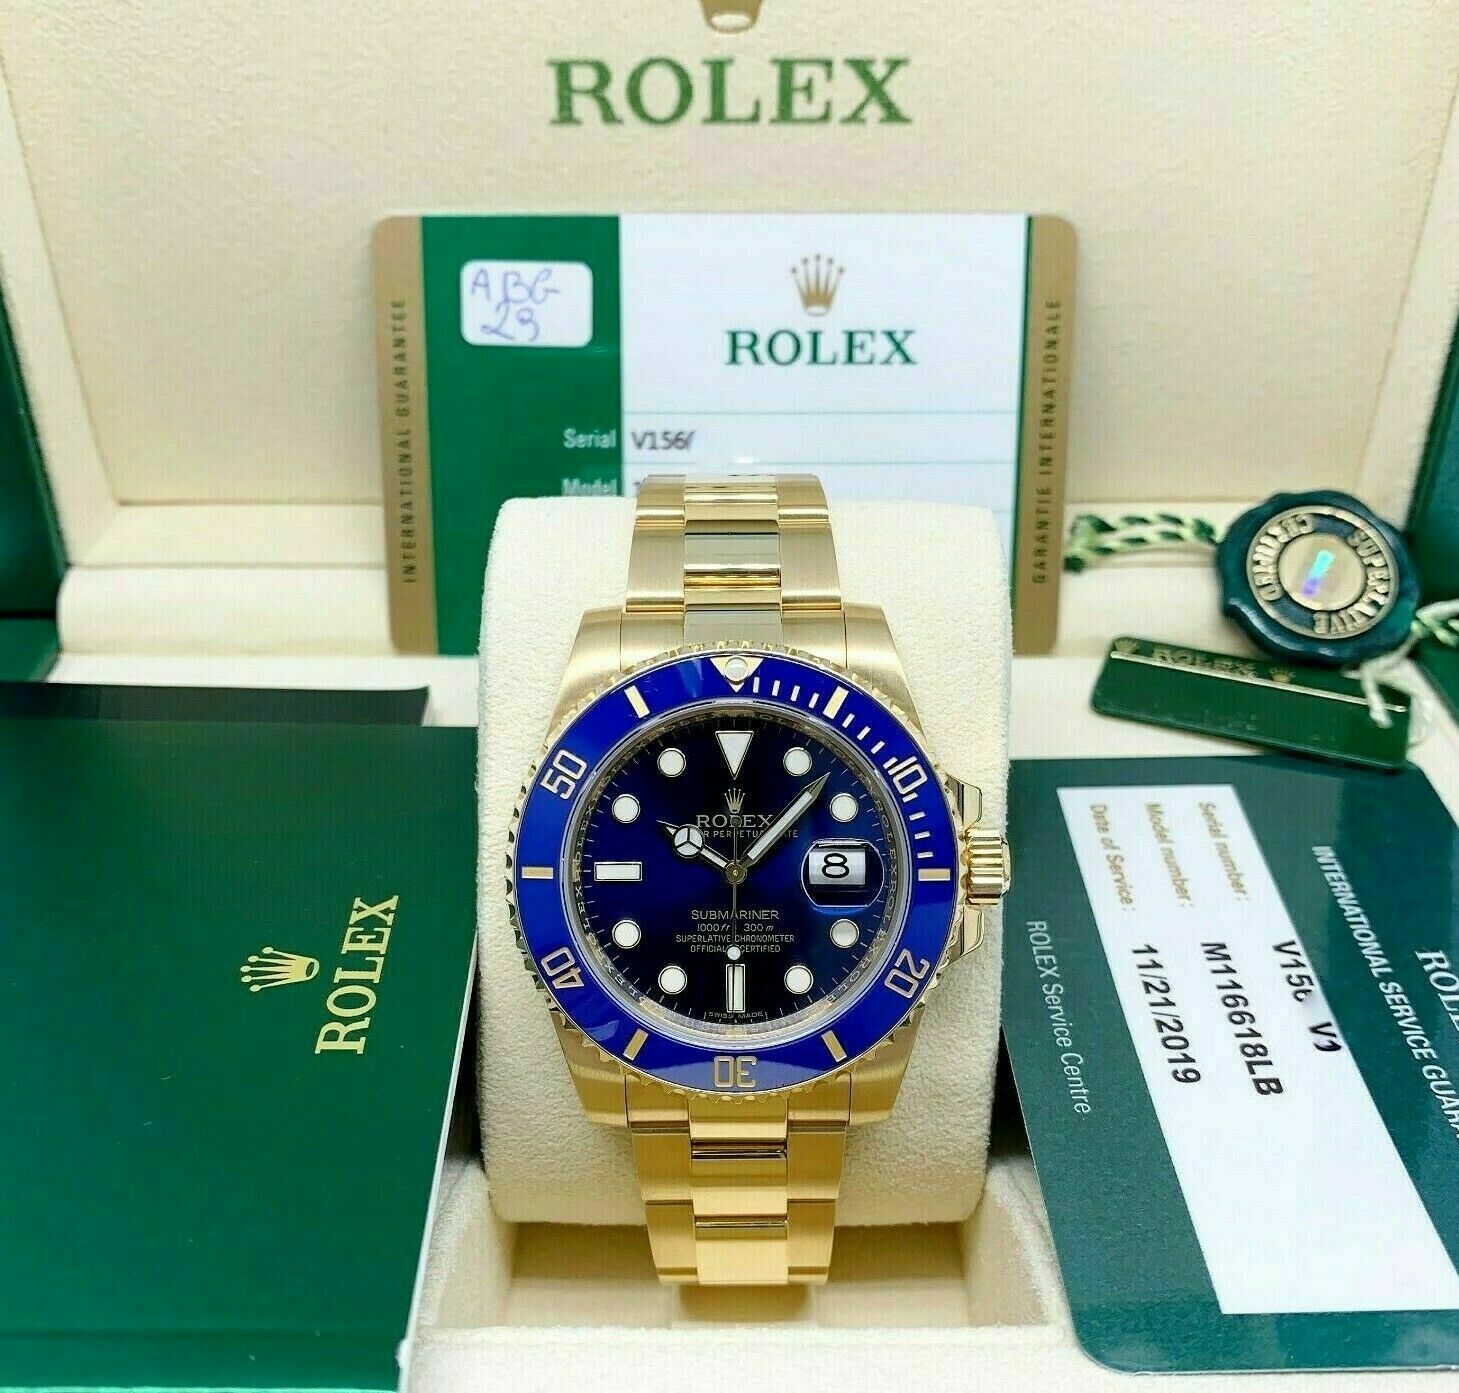 Rolex 40MM 18K Yellow Gold Blue Submariner Date Ref 116618LB Box and Card